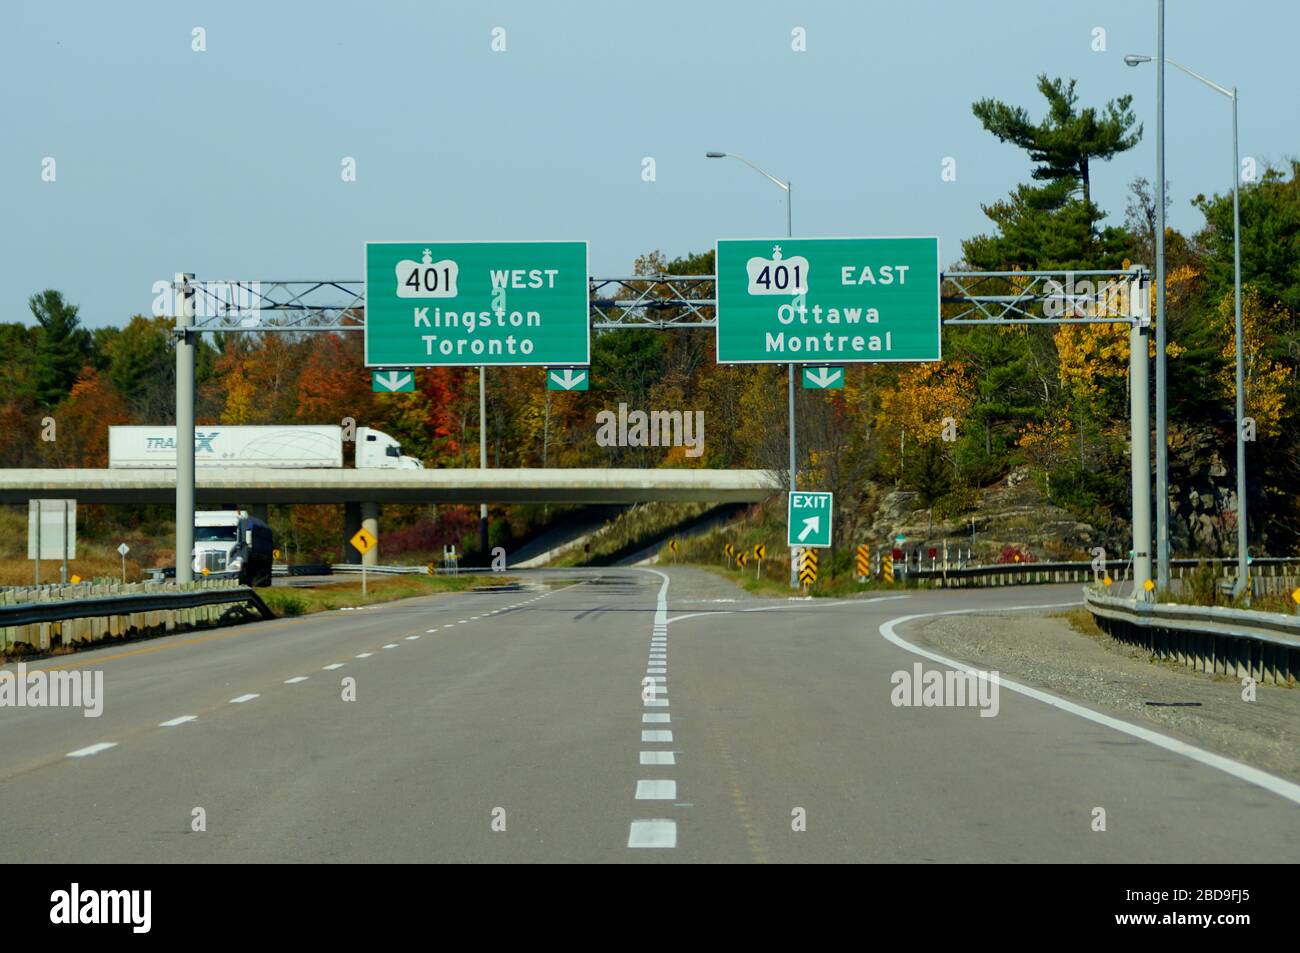 Ontario, Canada - October 28, 2019 - The view of the highway on Route 401 splits with striking fall foliage Stock Photo